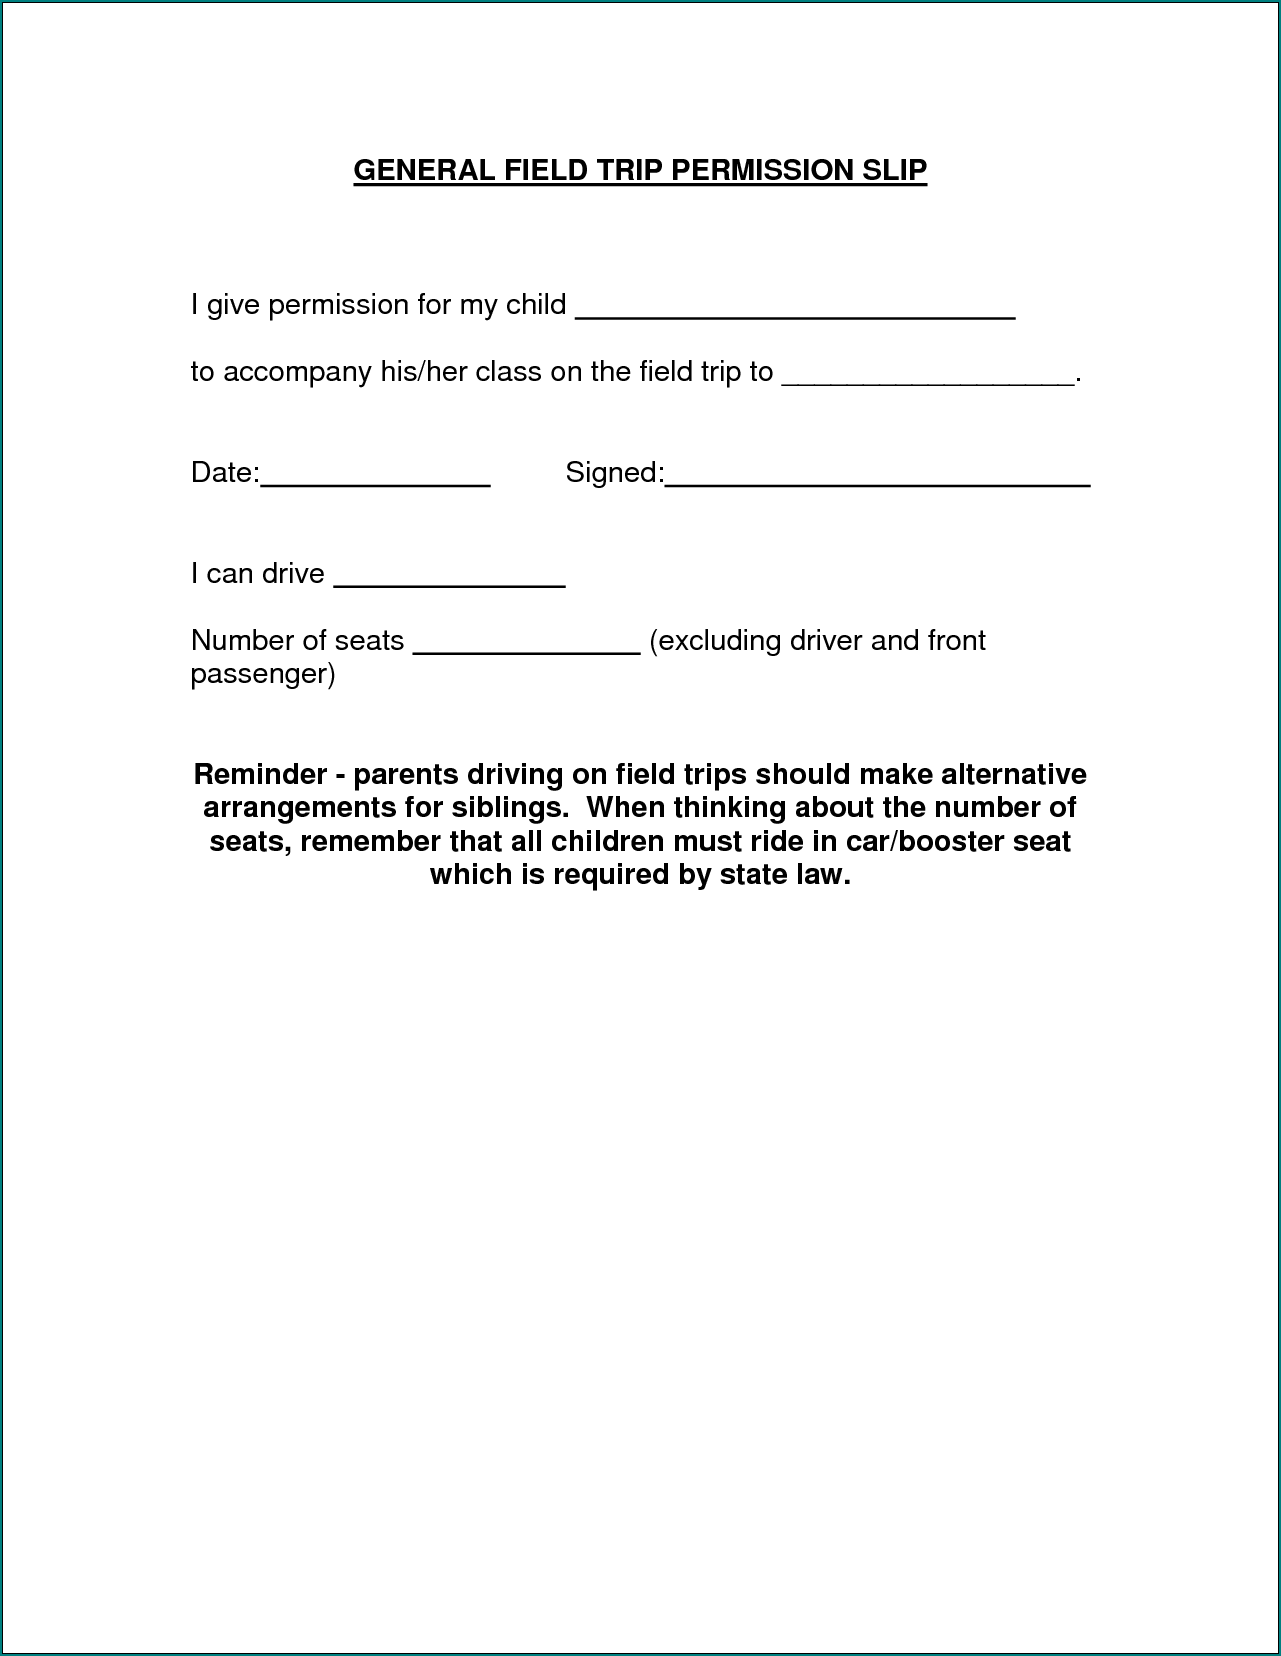 Example of Permission Slip For School Trip